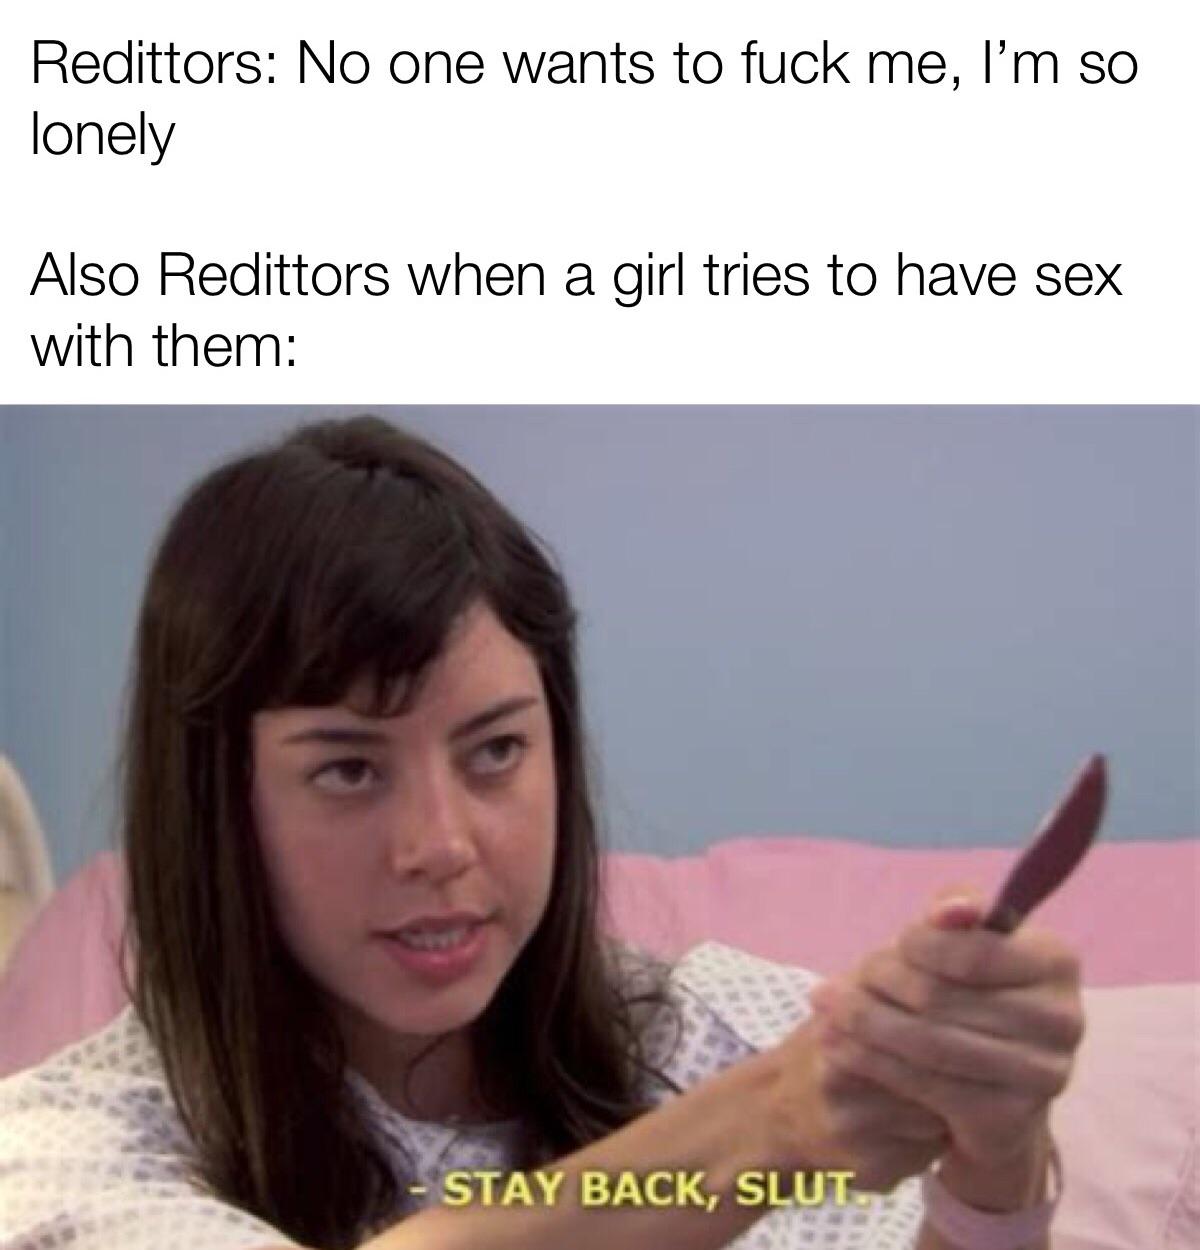 Funny, Redditors, Reddit, Aubrey Plaza, Thank, Tfw other memes Funny, Redditors, Reddit, Aubrey Plaza, Thank, Tfw text: Redittors: No one wants to fuck me, I'm so lonely Also Redittors when a girl tries to have sex with them: STA BACK,' SLUT 